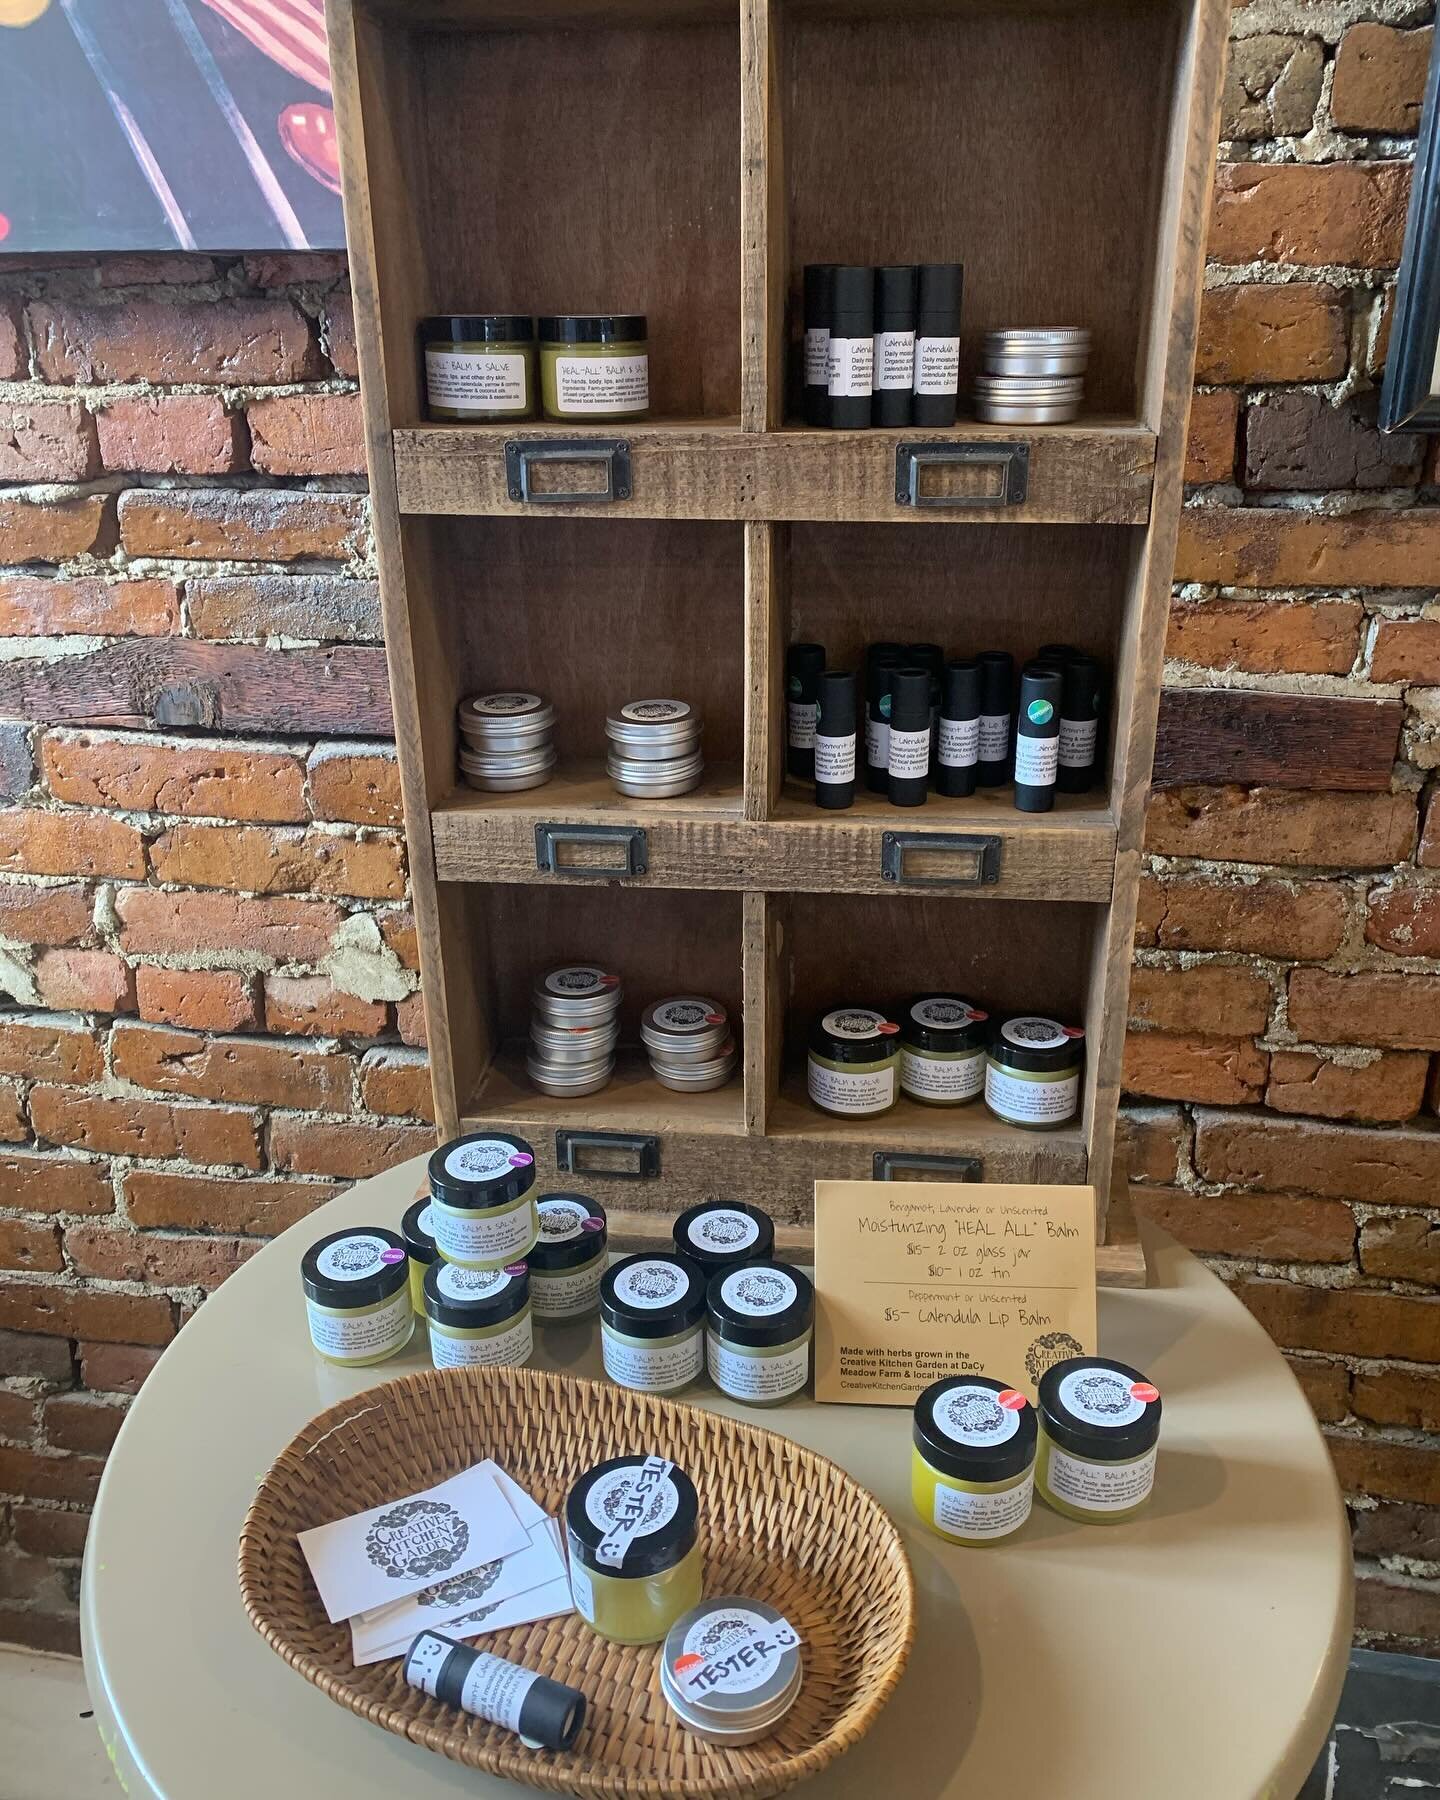 Hello friends! Just a note to say, my salves and lip balms are available for sale at @jambsonmain and @ledgehillstudiodowntown! Once they are sold out, they are sold out for the season. So consider stocking up for the year :) the lavender salve makes